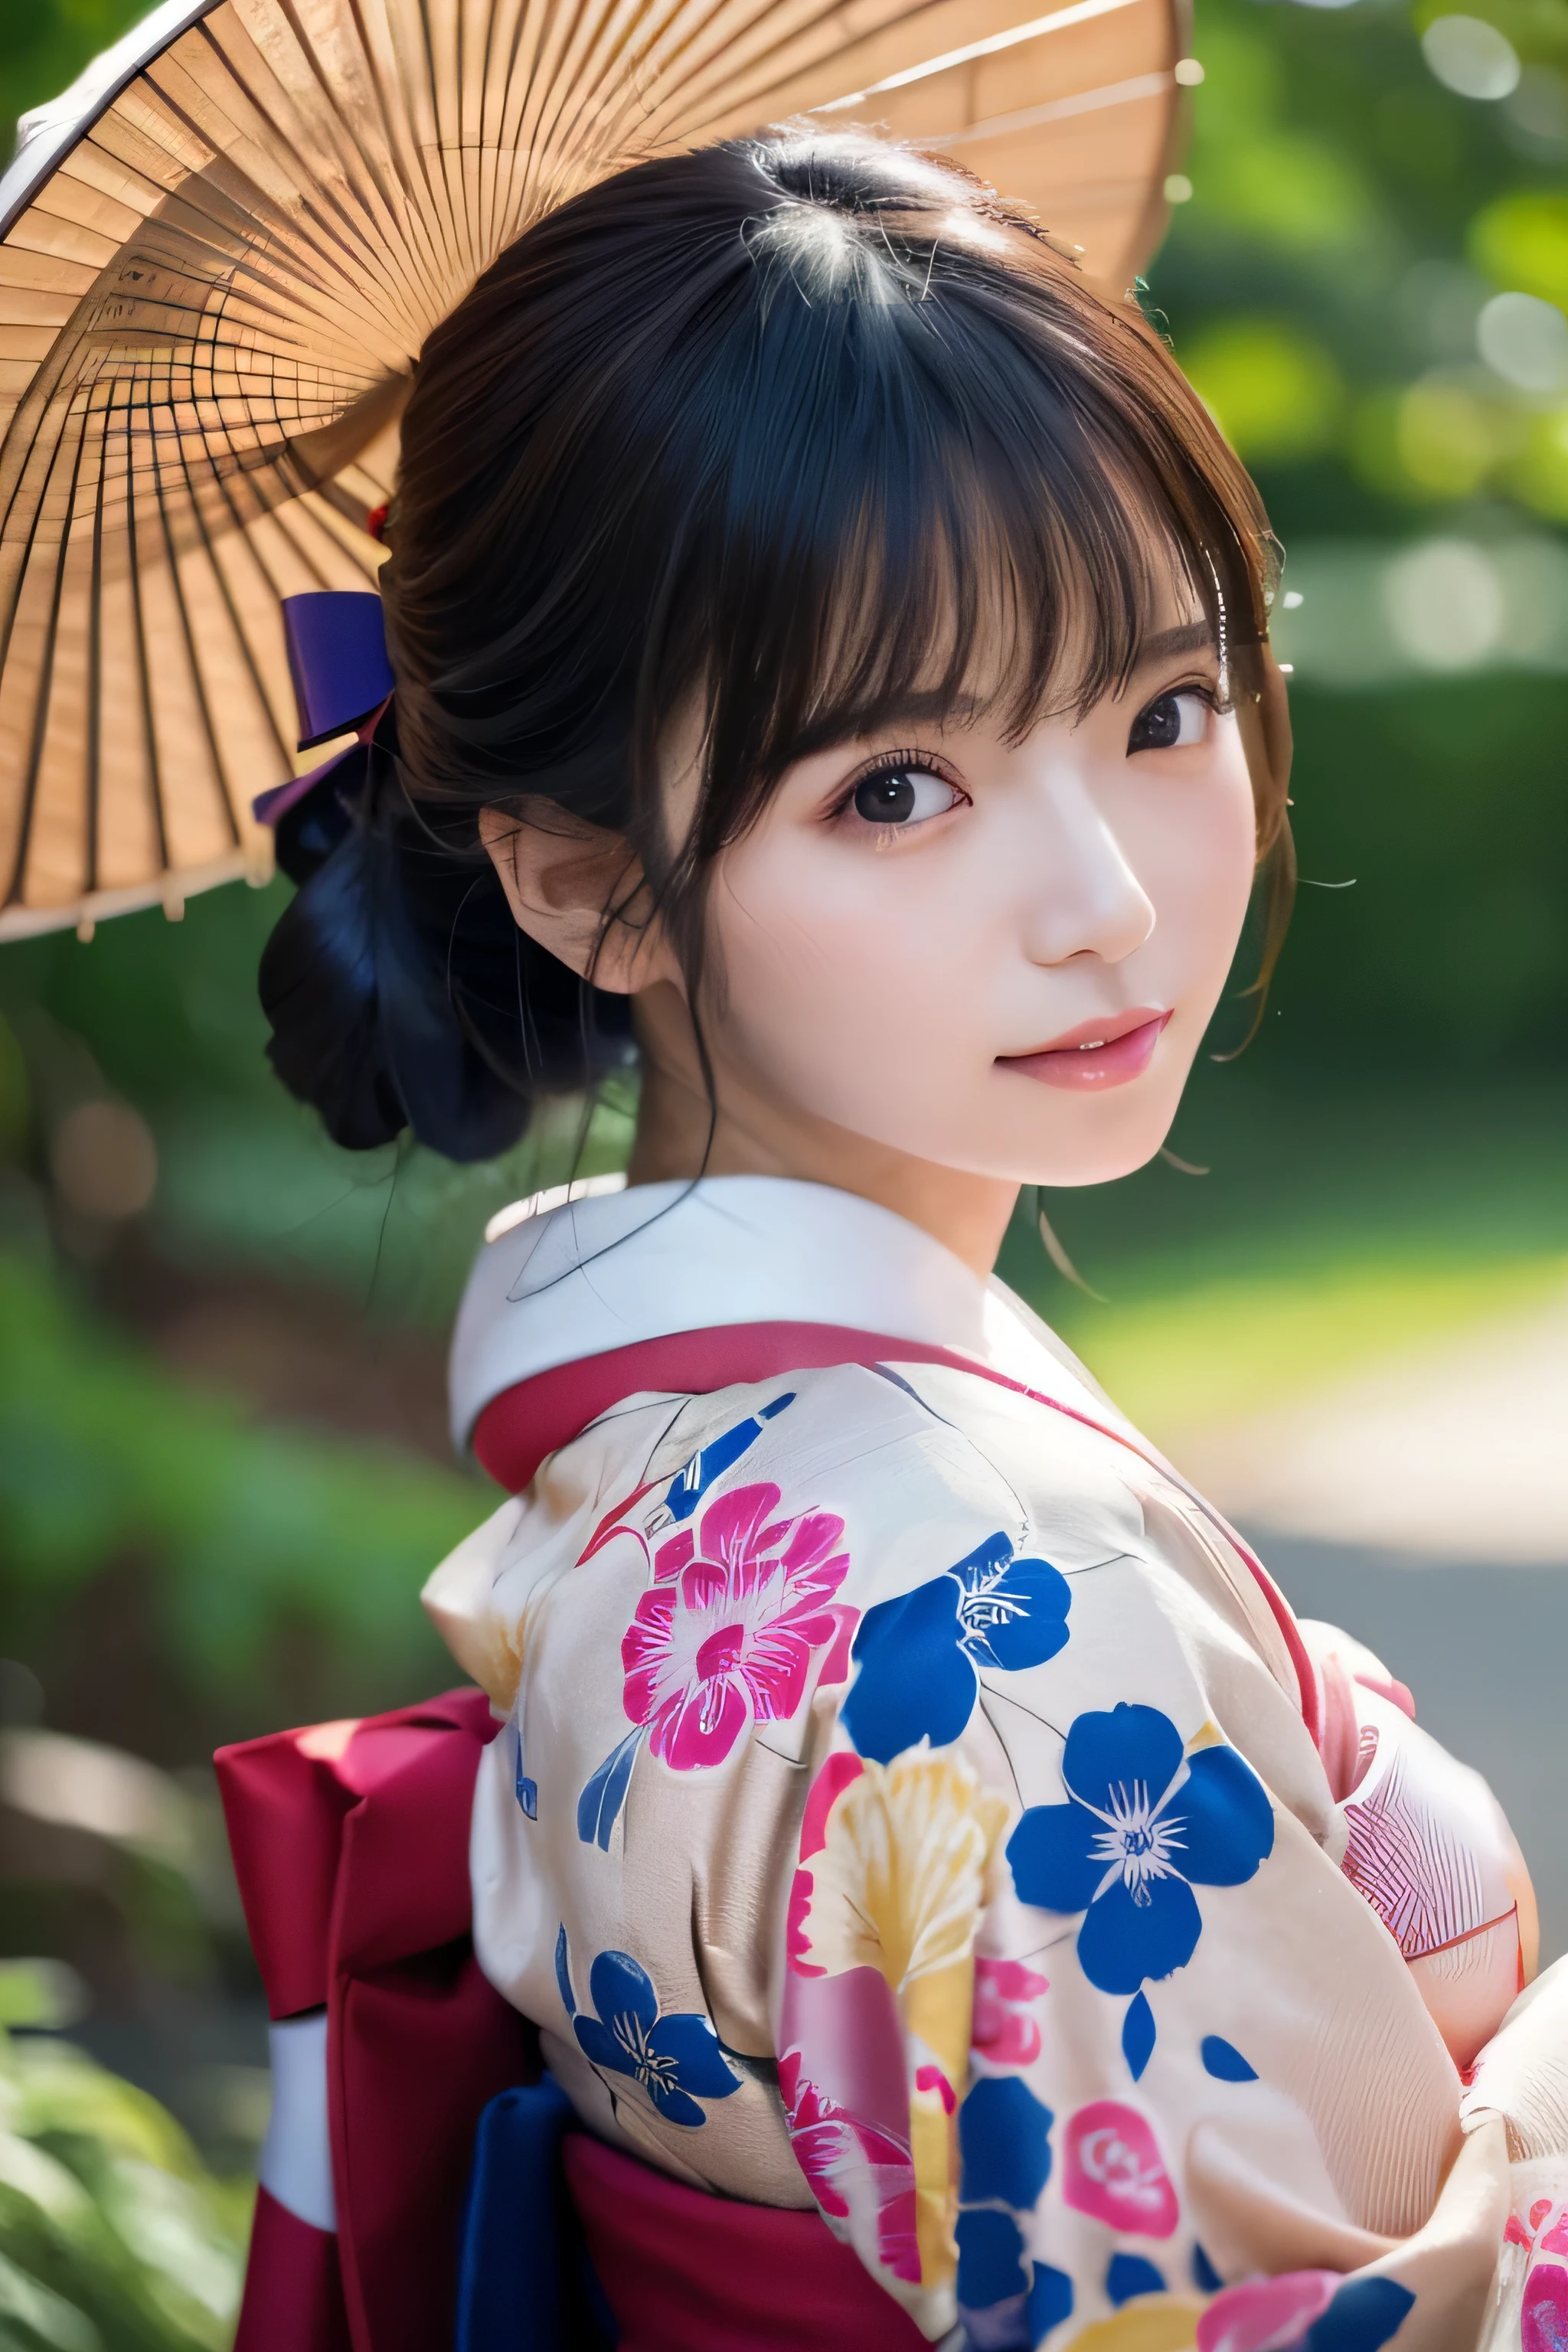 (Kimono)、((35 year old))、randome pose、(top-quality,​masterpiece:1.3,超A high resolution,),(ultra-detailliert,Caustics),(Photorealsitic:1.4,RAW shooting,)Ultra-realistic capture,A highly detailed,High resolution 16K human skin close-up、 Skin texture is natural、、The skin looks healthy with an even tone、 Use natural light and color,女の子1人,japanes,,kawaii,A dark-haired,Middle hair,,smil,,(depth of fields、chromatic abberation、、Wide range of lighting、Natural Shading、)、